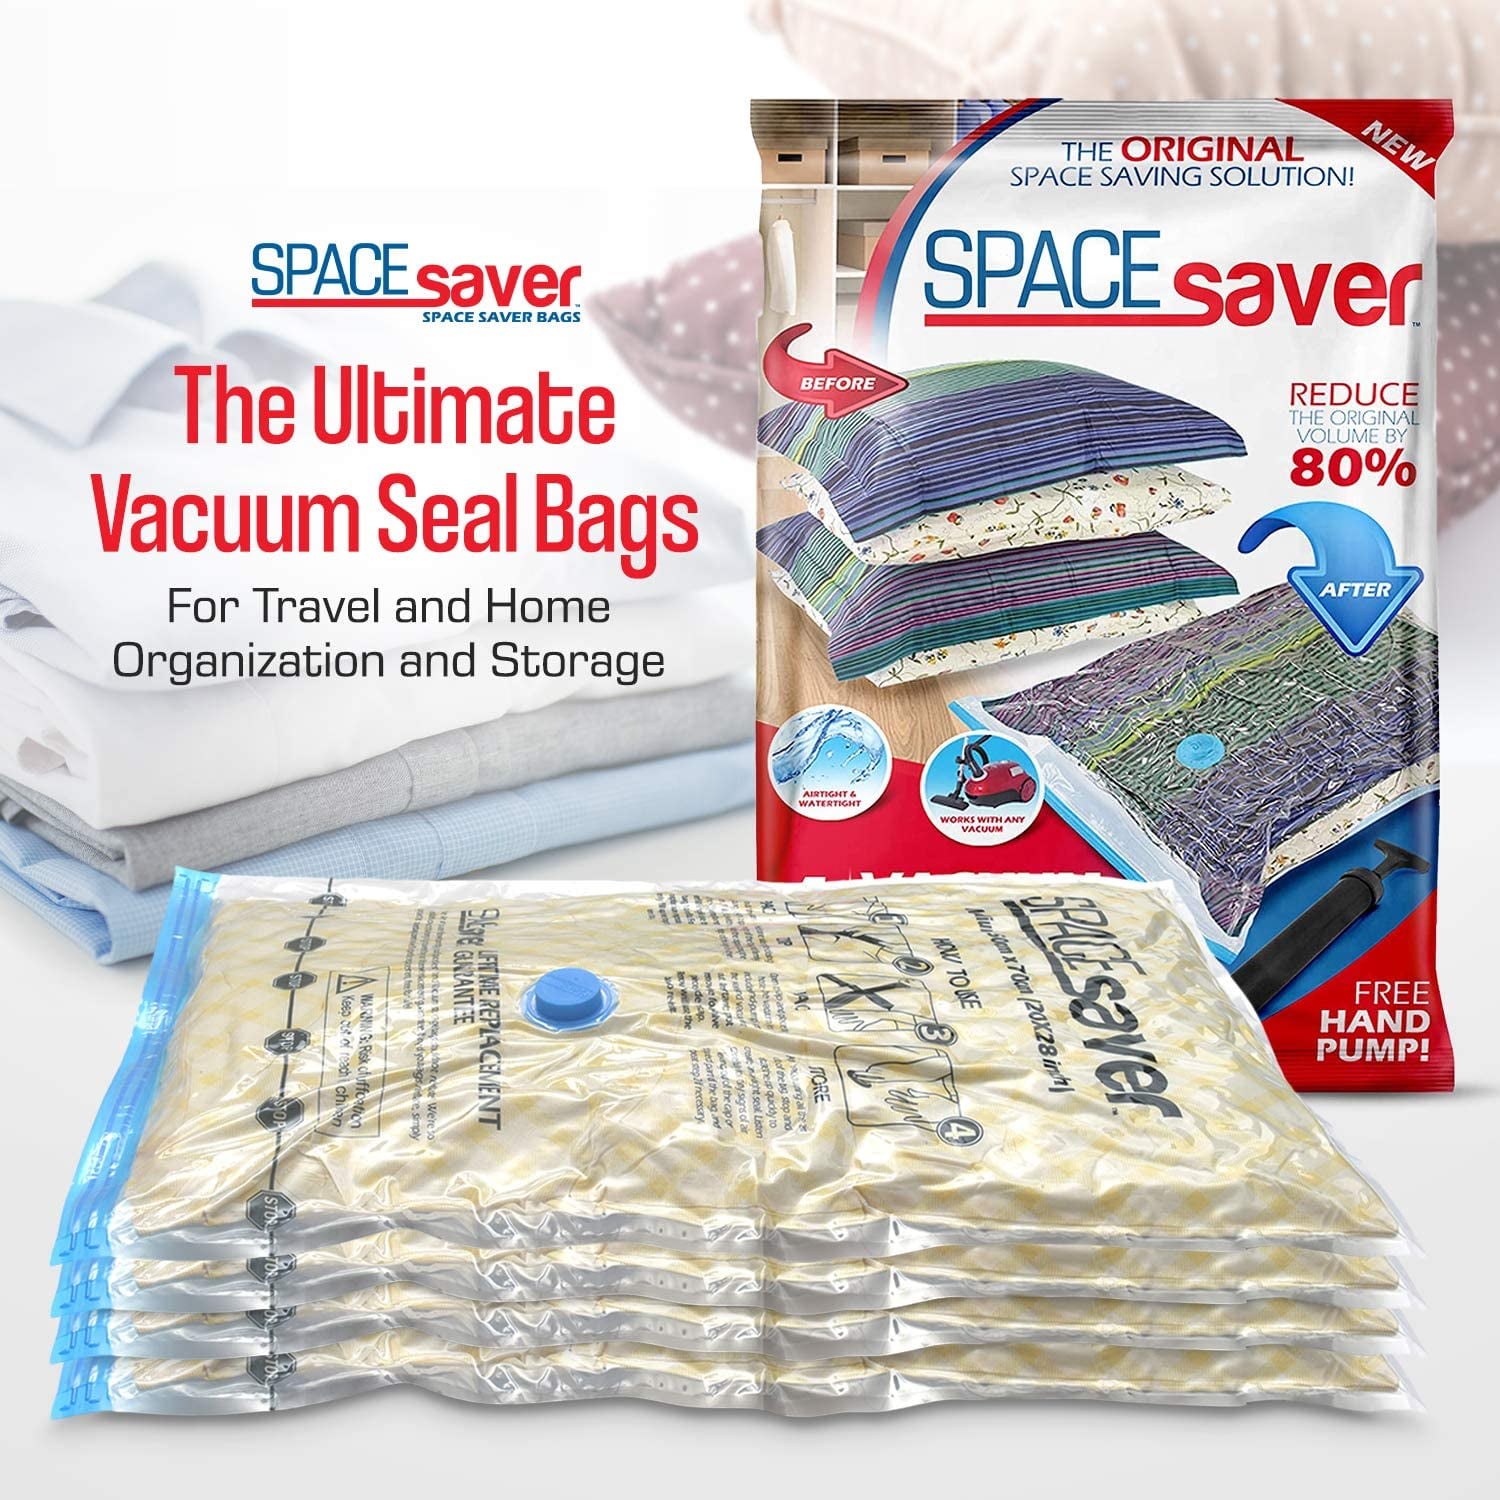 Ebuy4less 10 Pack Deal Jumbo/Large Space Saver Vacuum Seal Storage Bags  Combo with Travel Bags and Carry On Pouch Bags